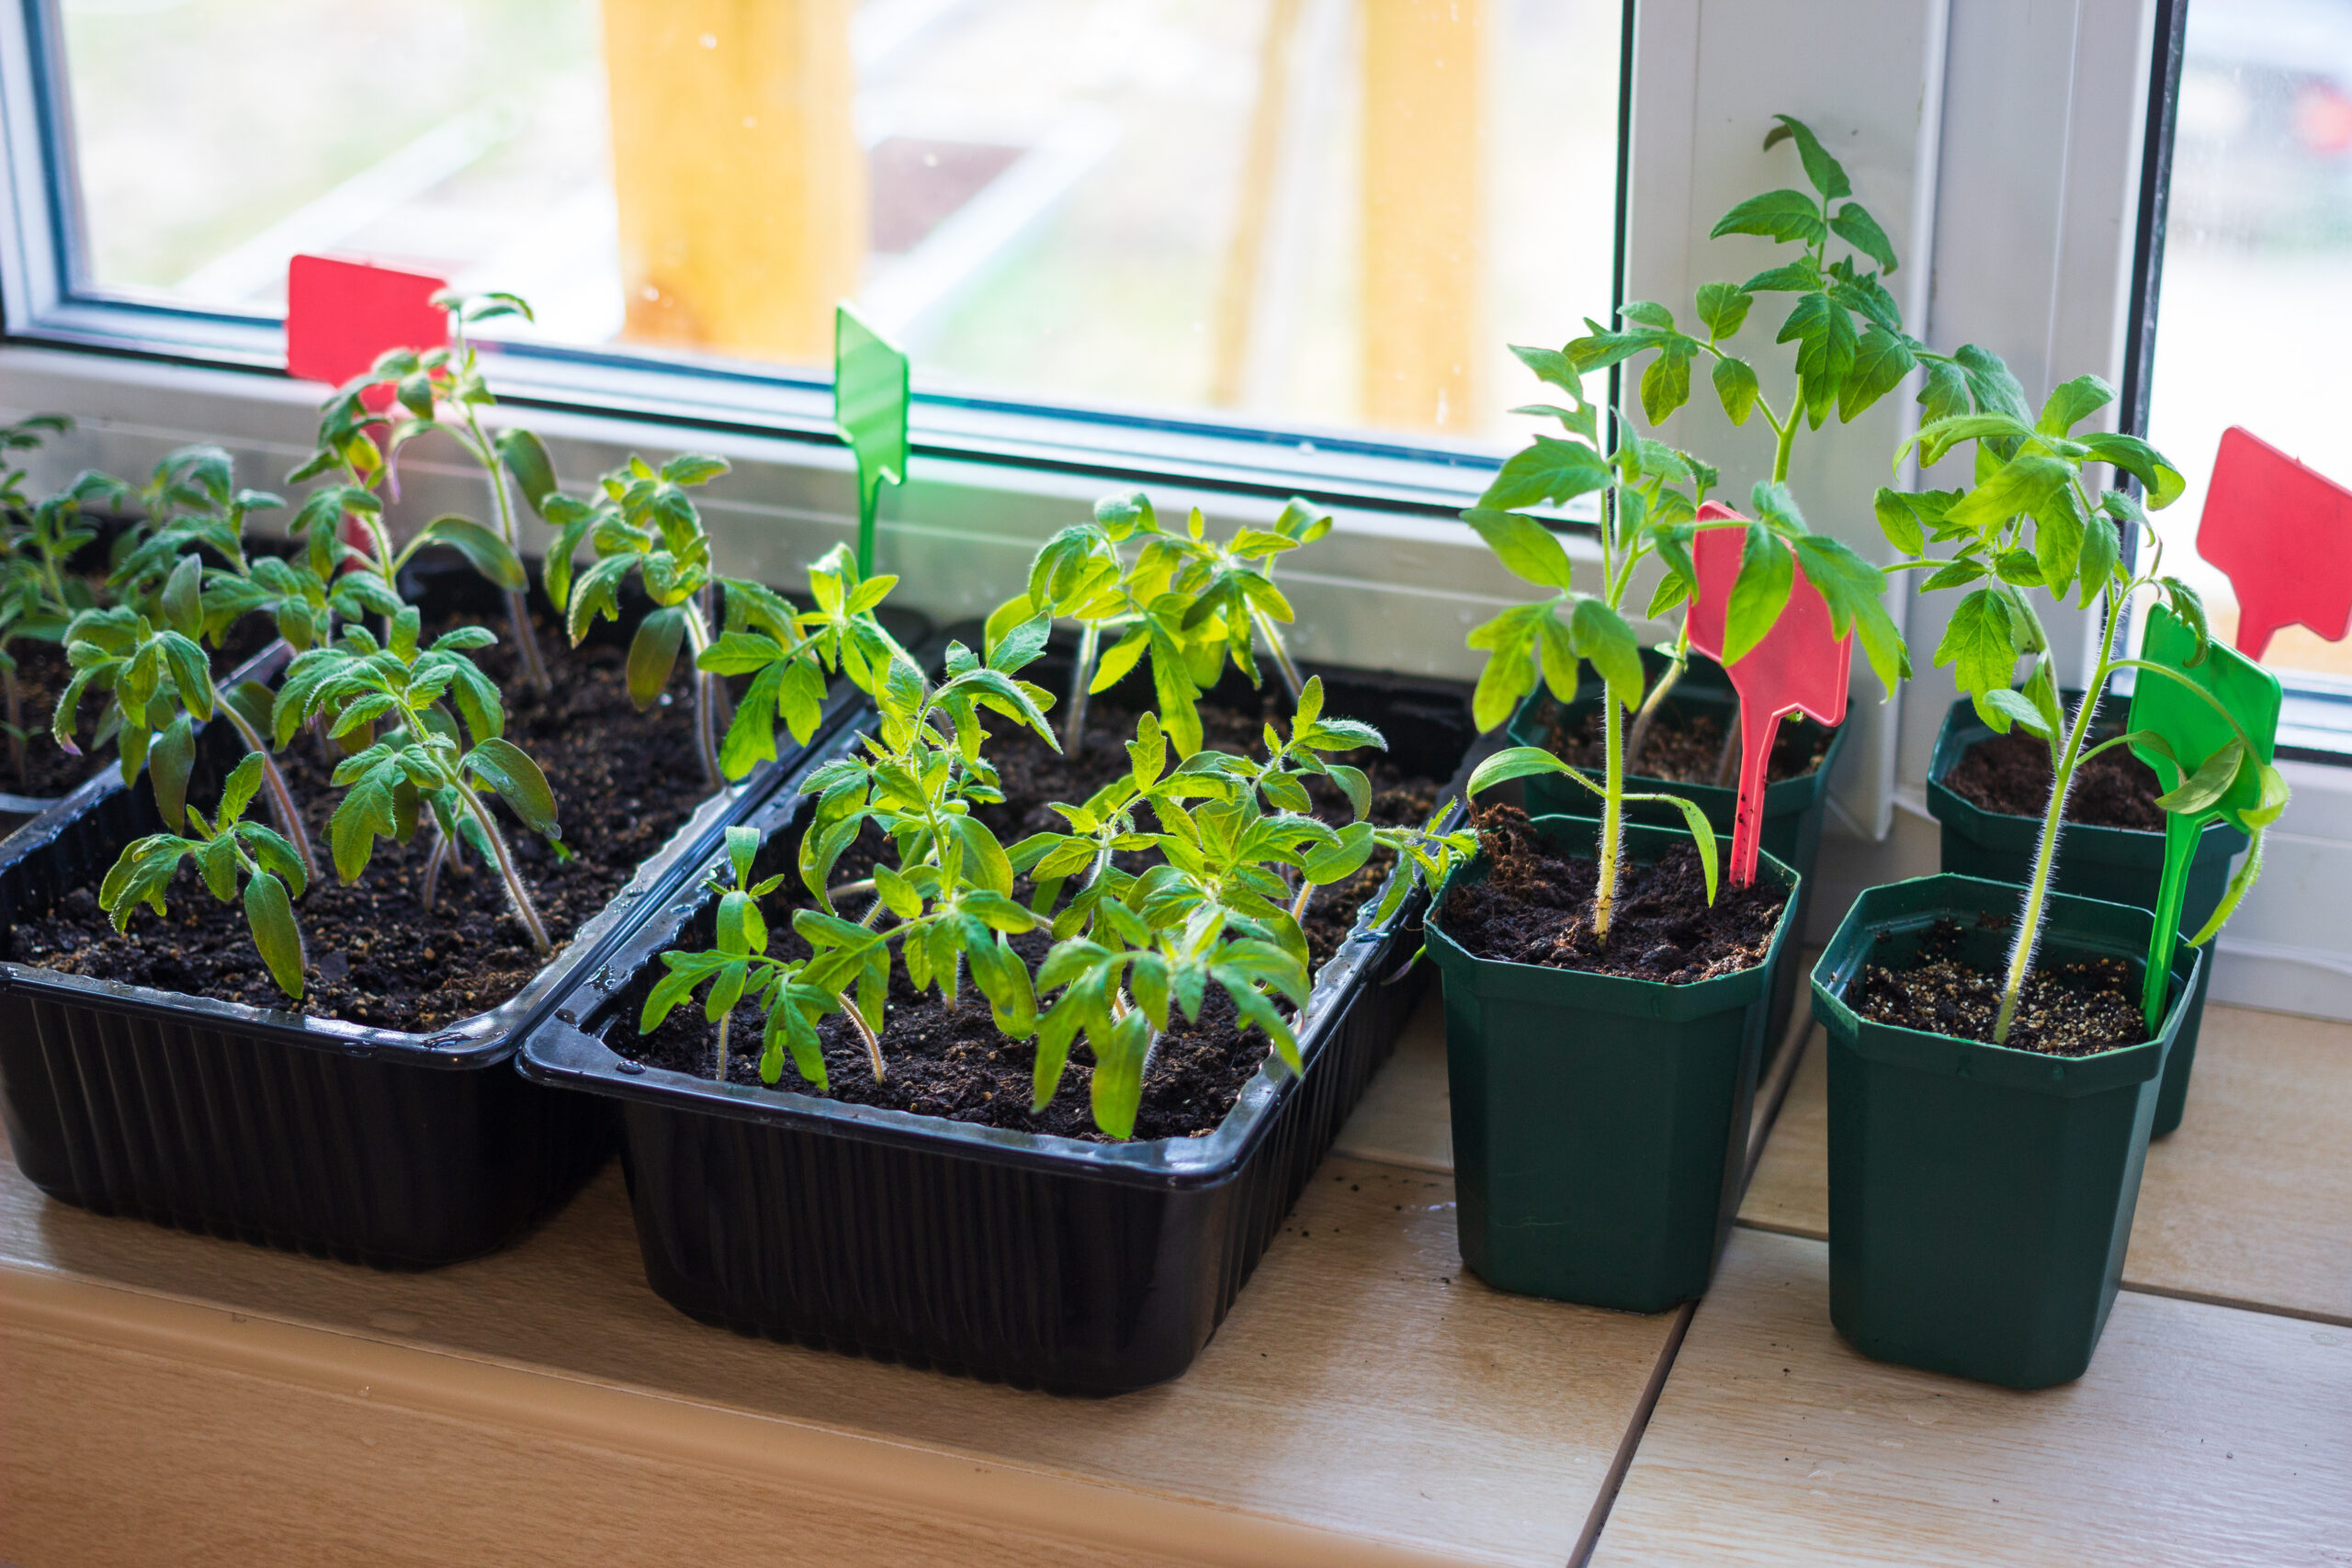 Growing tomato seedlings plants in plastic pots with soil on balcony window sill with tags labels. Urban home balcony gardening